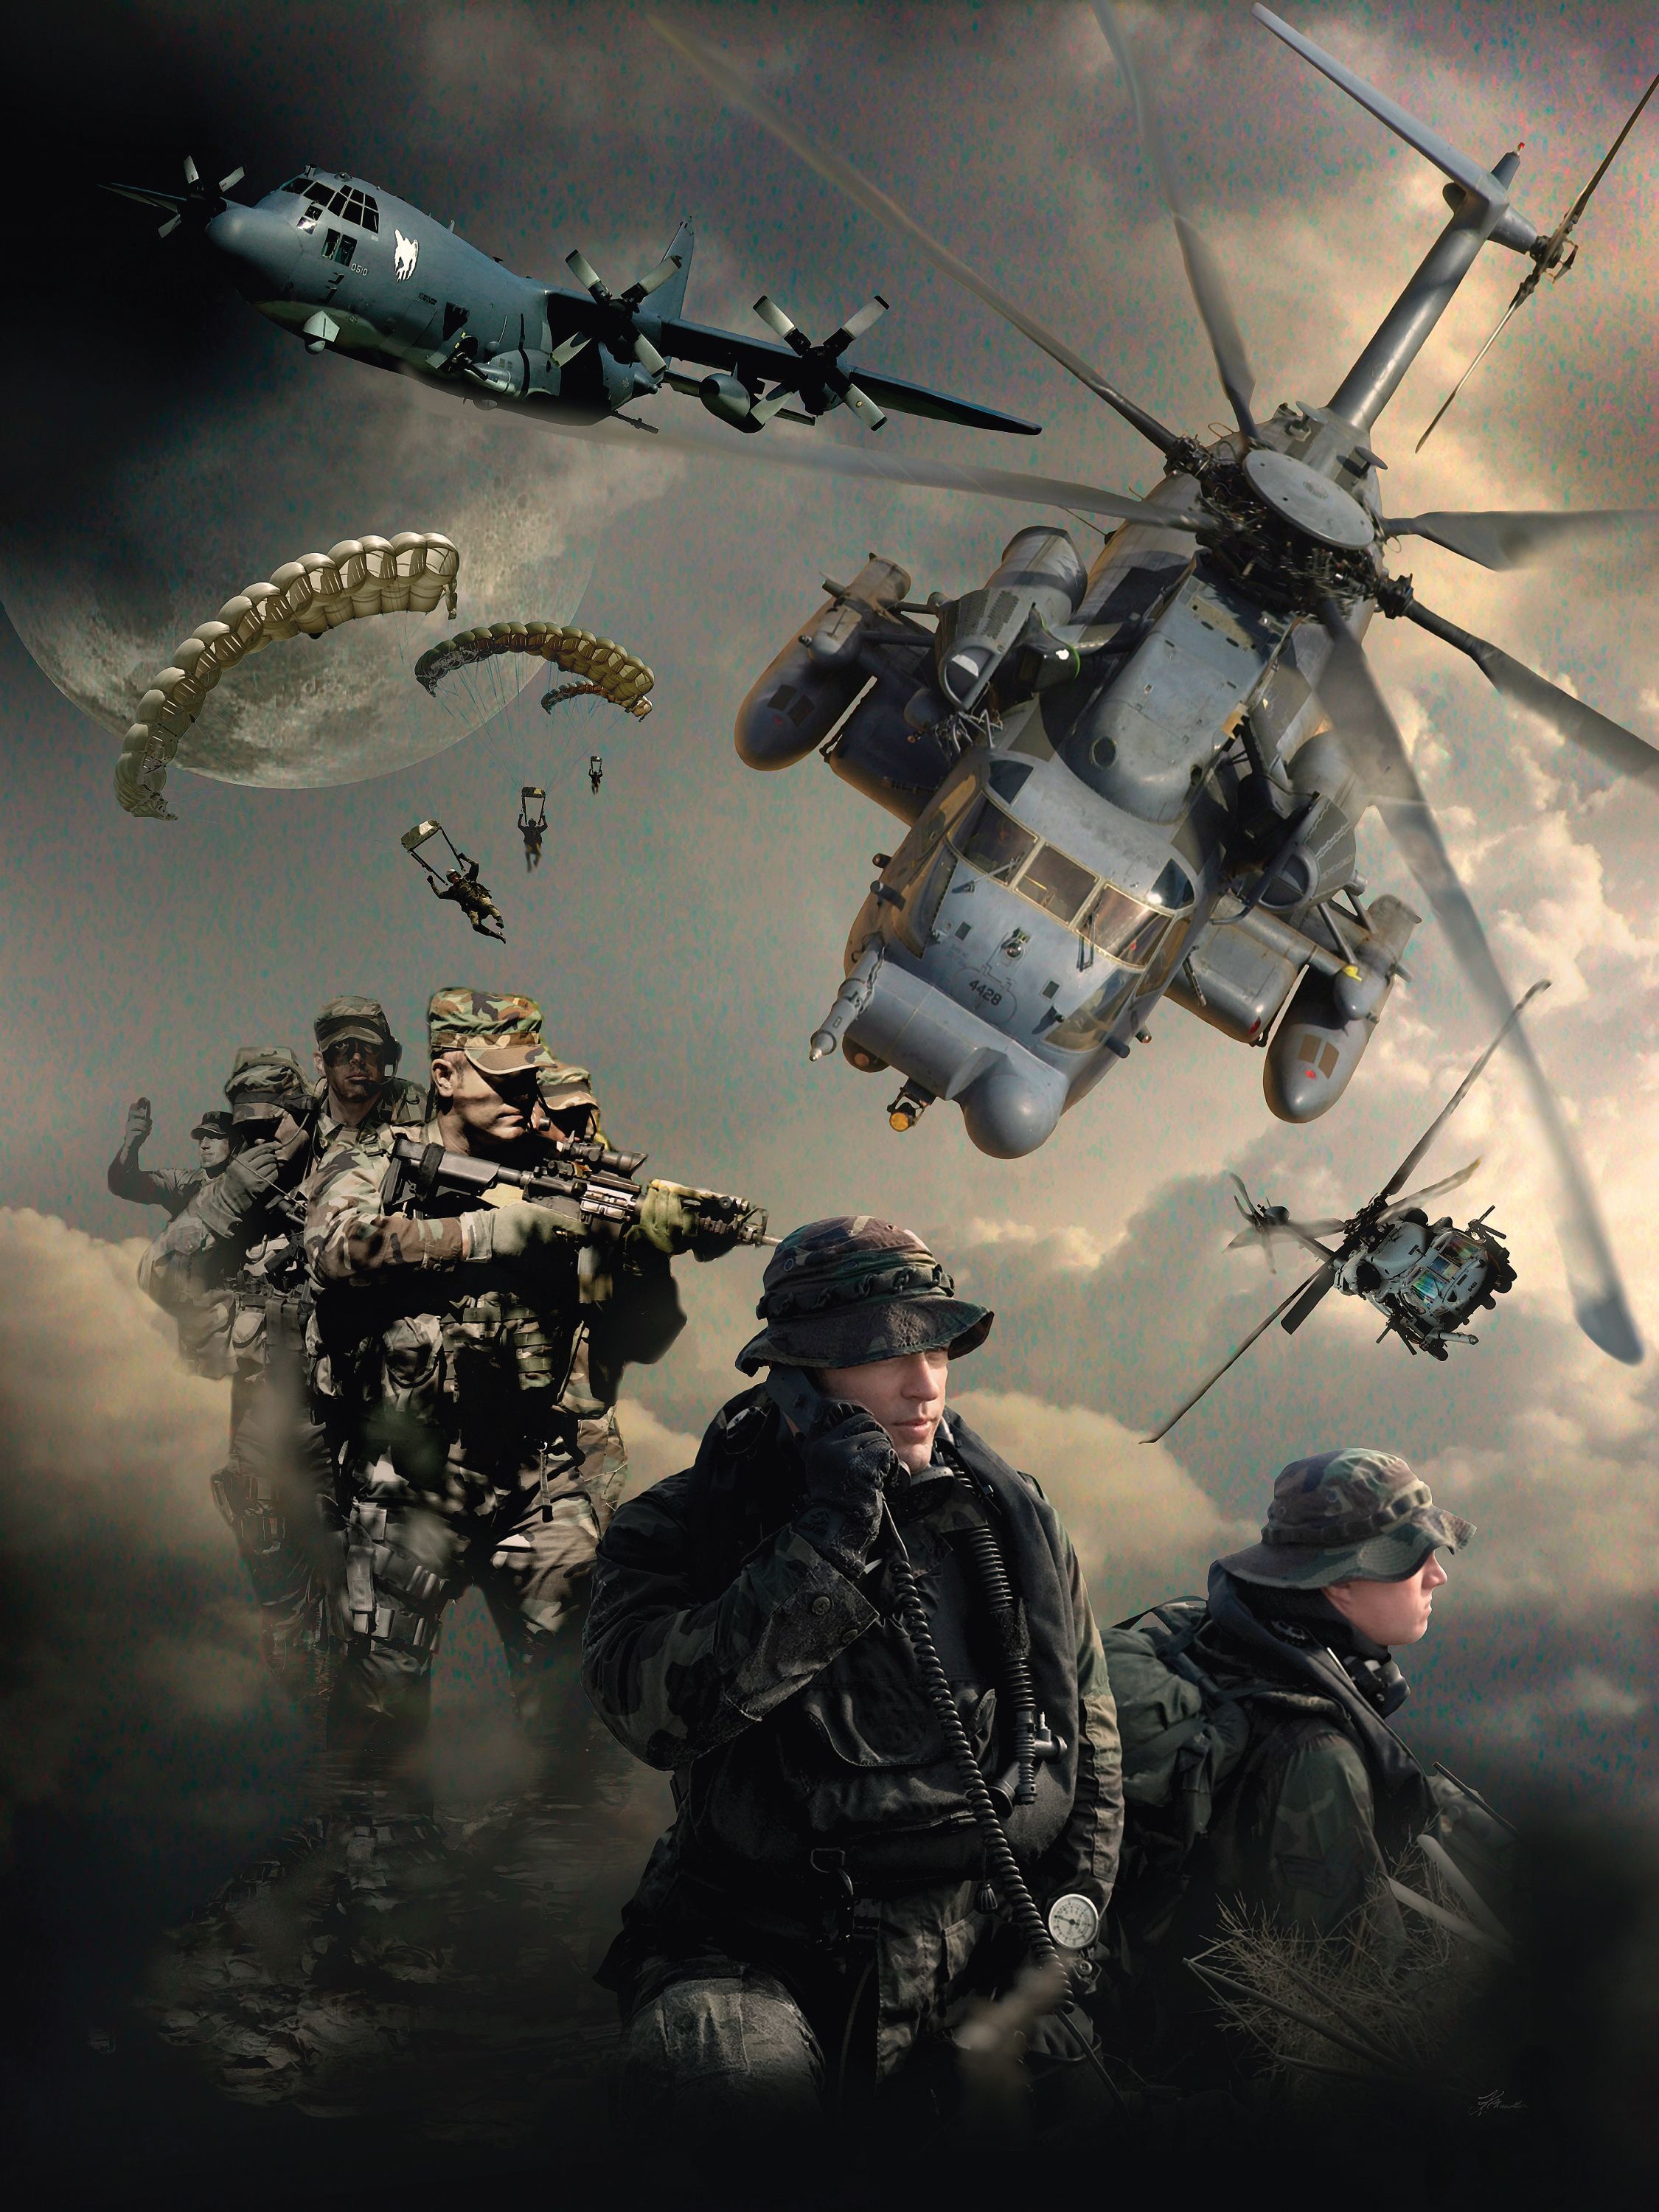 Sweet Air Force Special Ops Command poster!